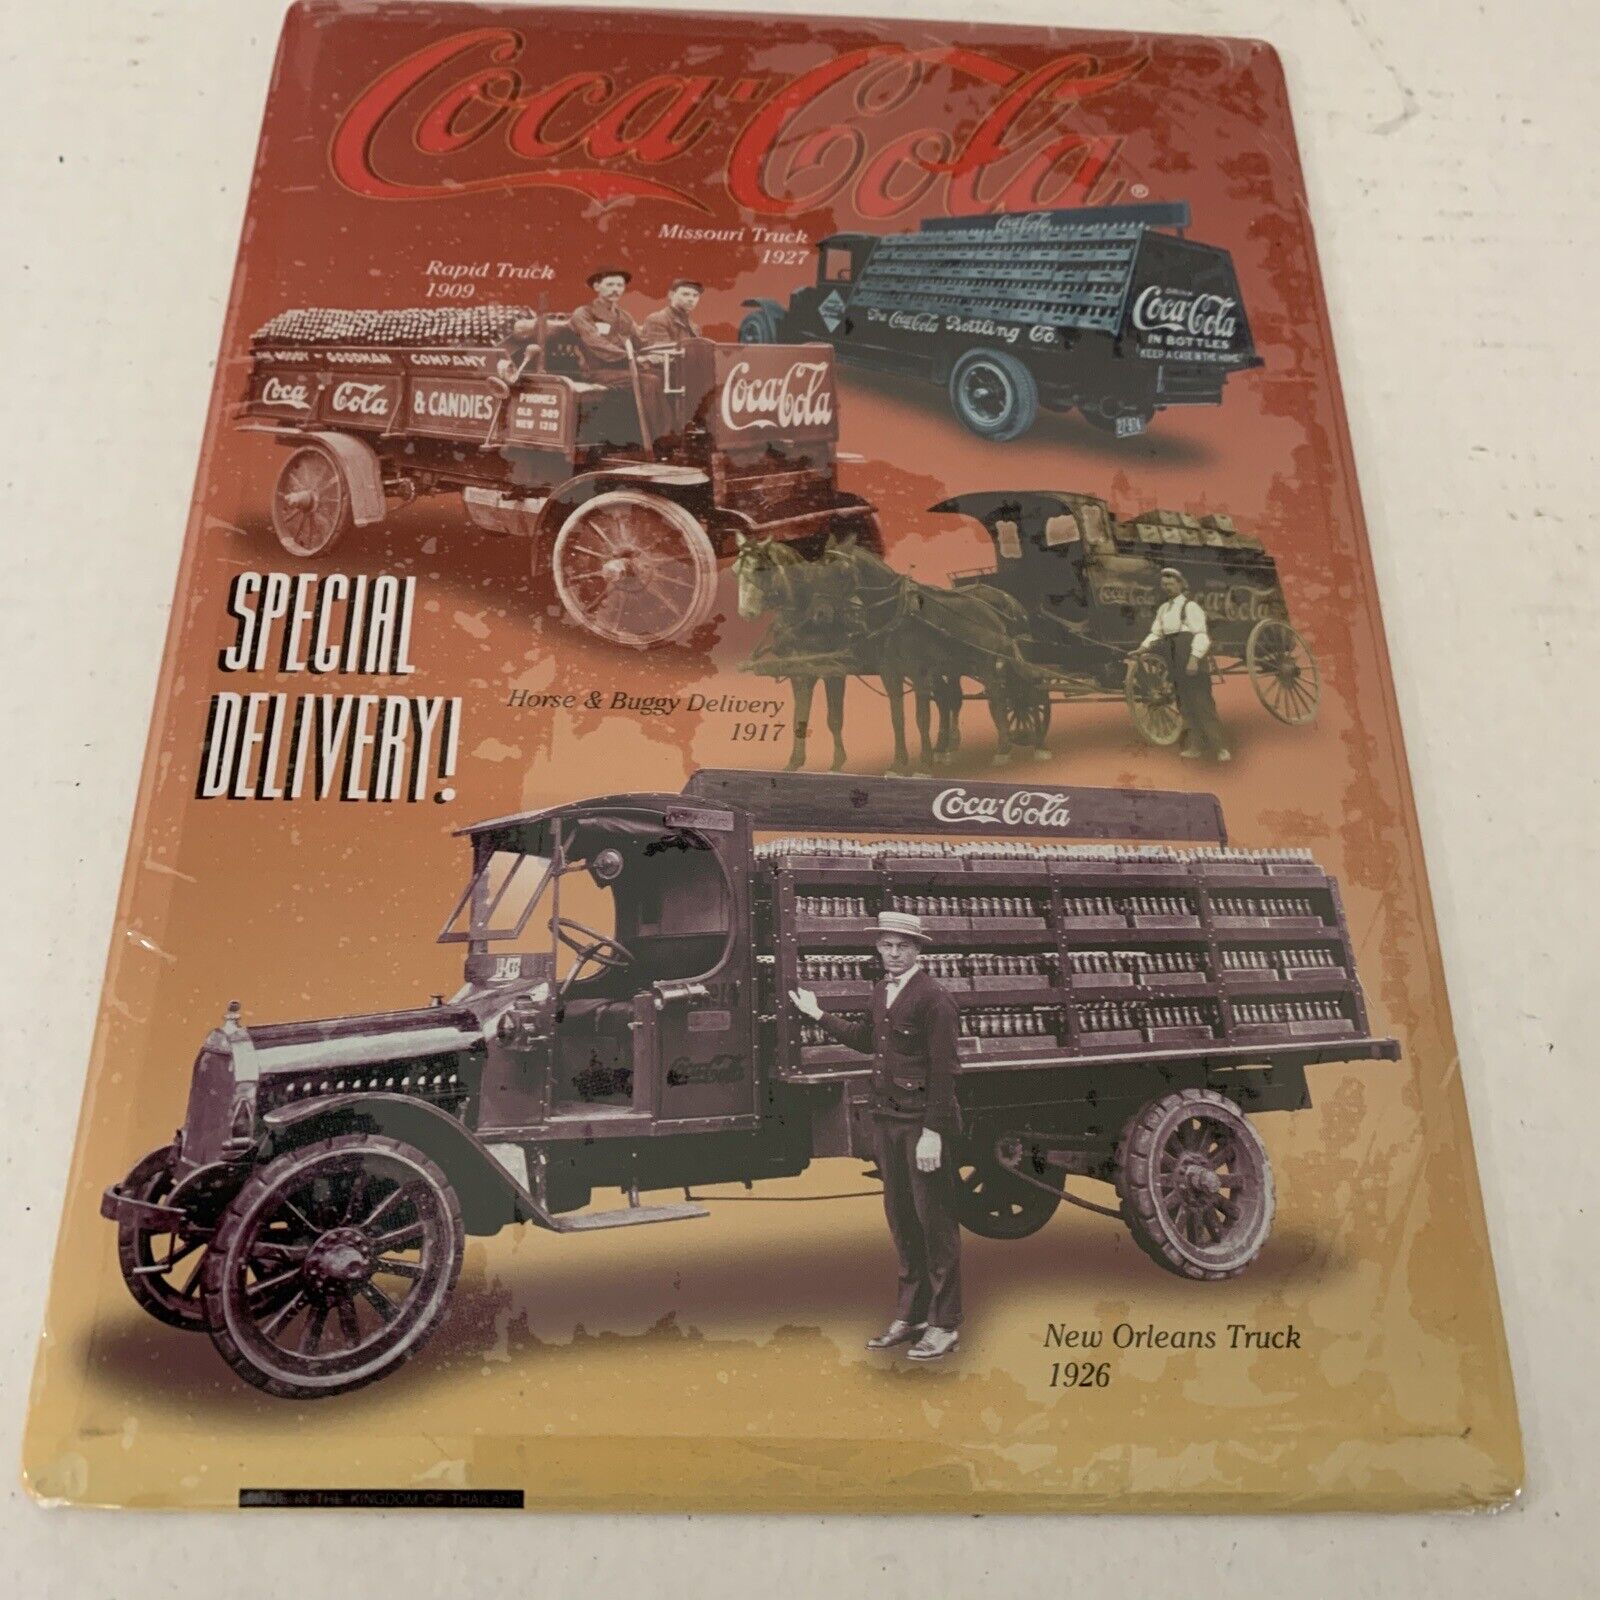 Coca Cola Team Metal Tin Metal Sign Poster COCA-COLA THE REAL THING 1996 New